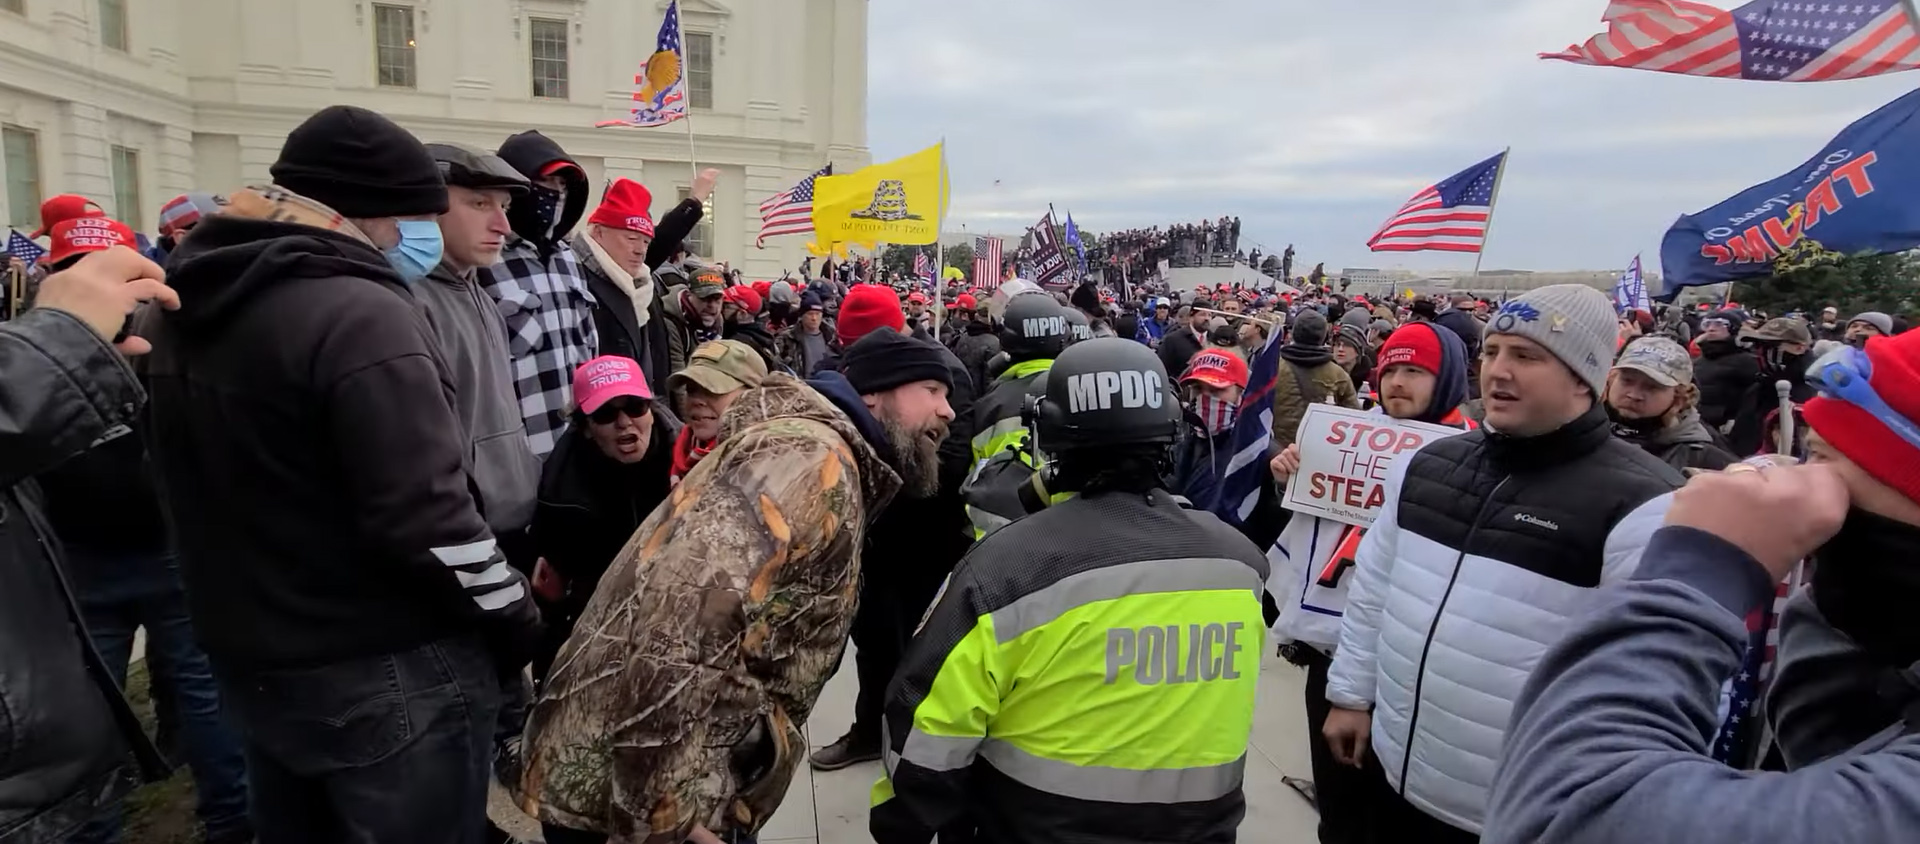 PHOTO: Scott Fairlamb of Sussex County, N.J., wearing a camouflage jacket, was caught on video shoving and hitting police outside of the U.S. Capitol in Washington on Jan. 6, 2021.